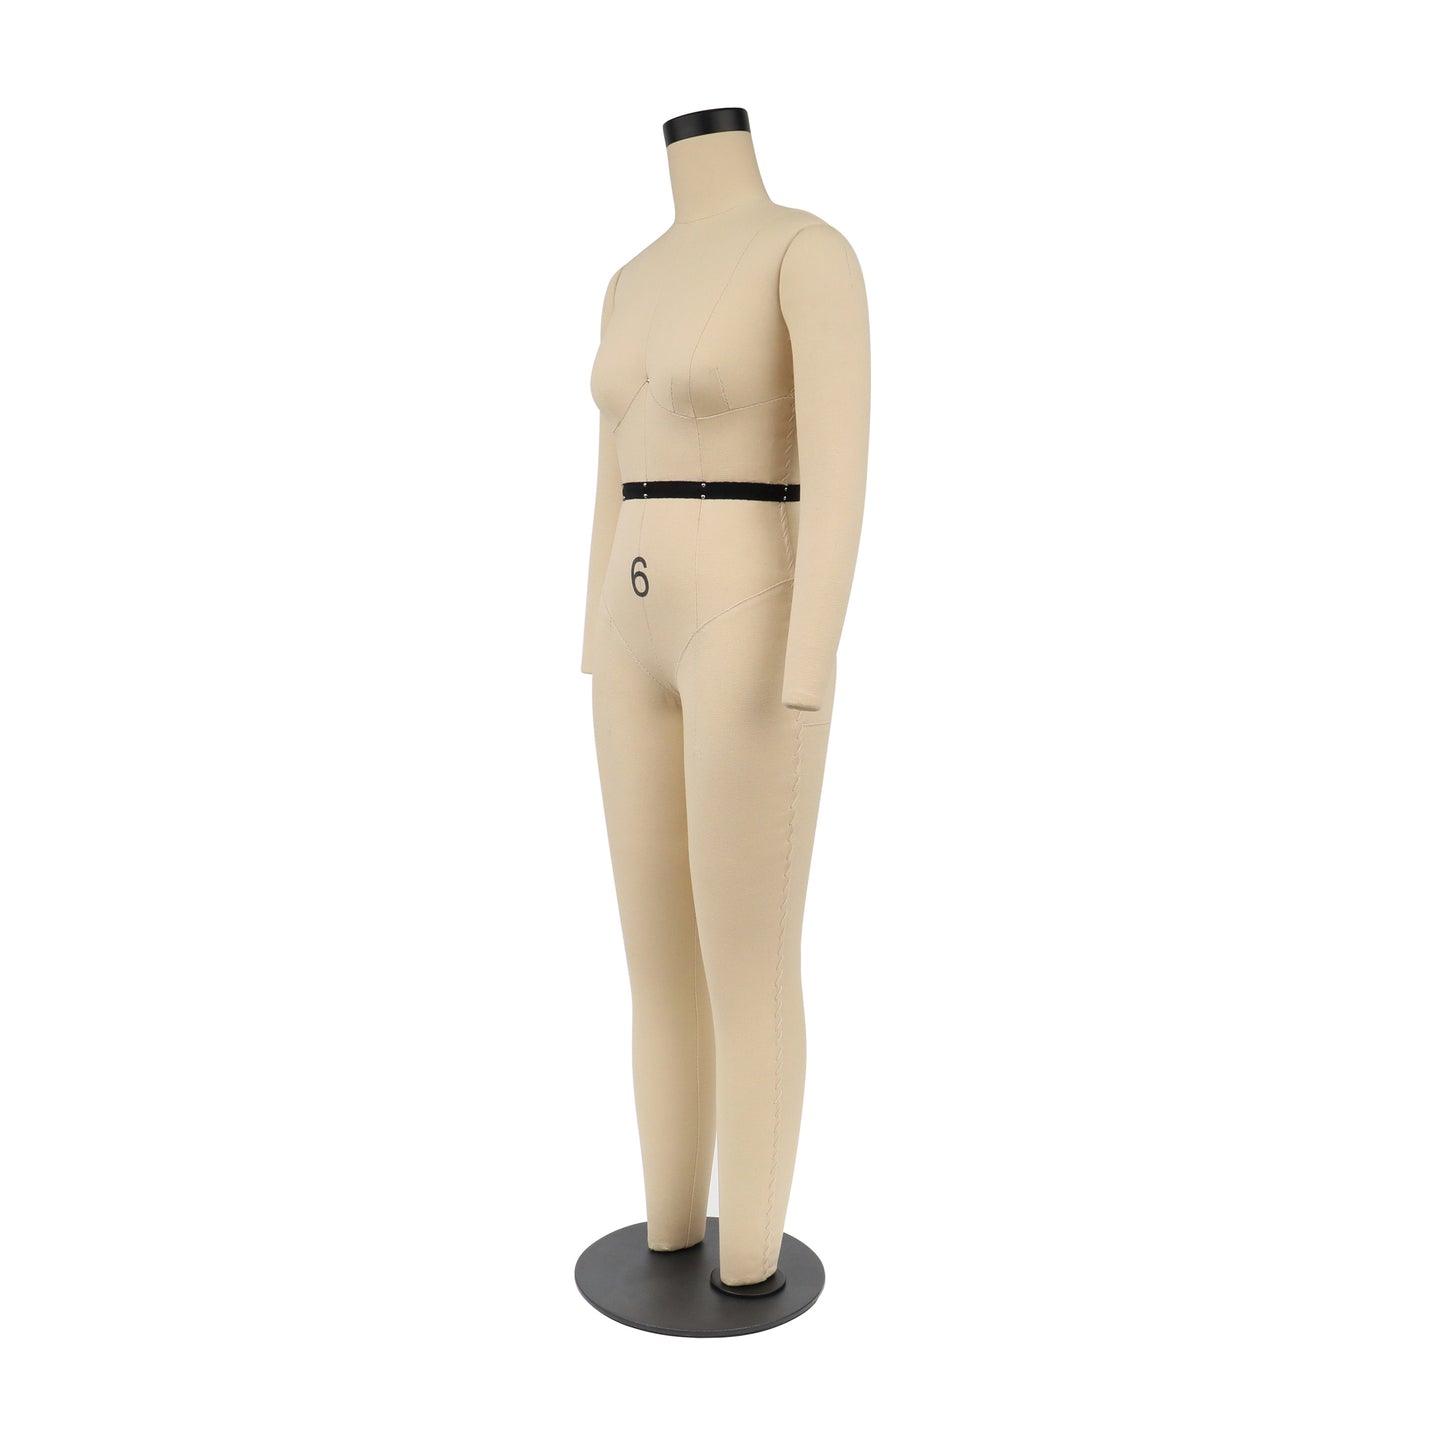 DL265 Half Scale dress form full body, US size 6 1/2 scale tailoring dummy,Sewing Dressmaker Mannequin with Detachable Arms